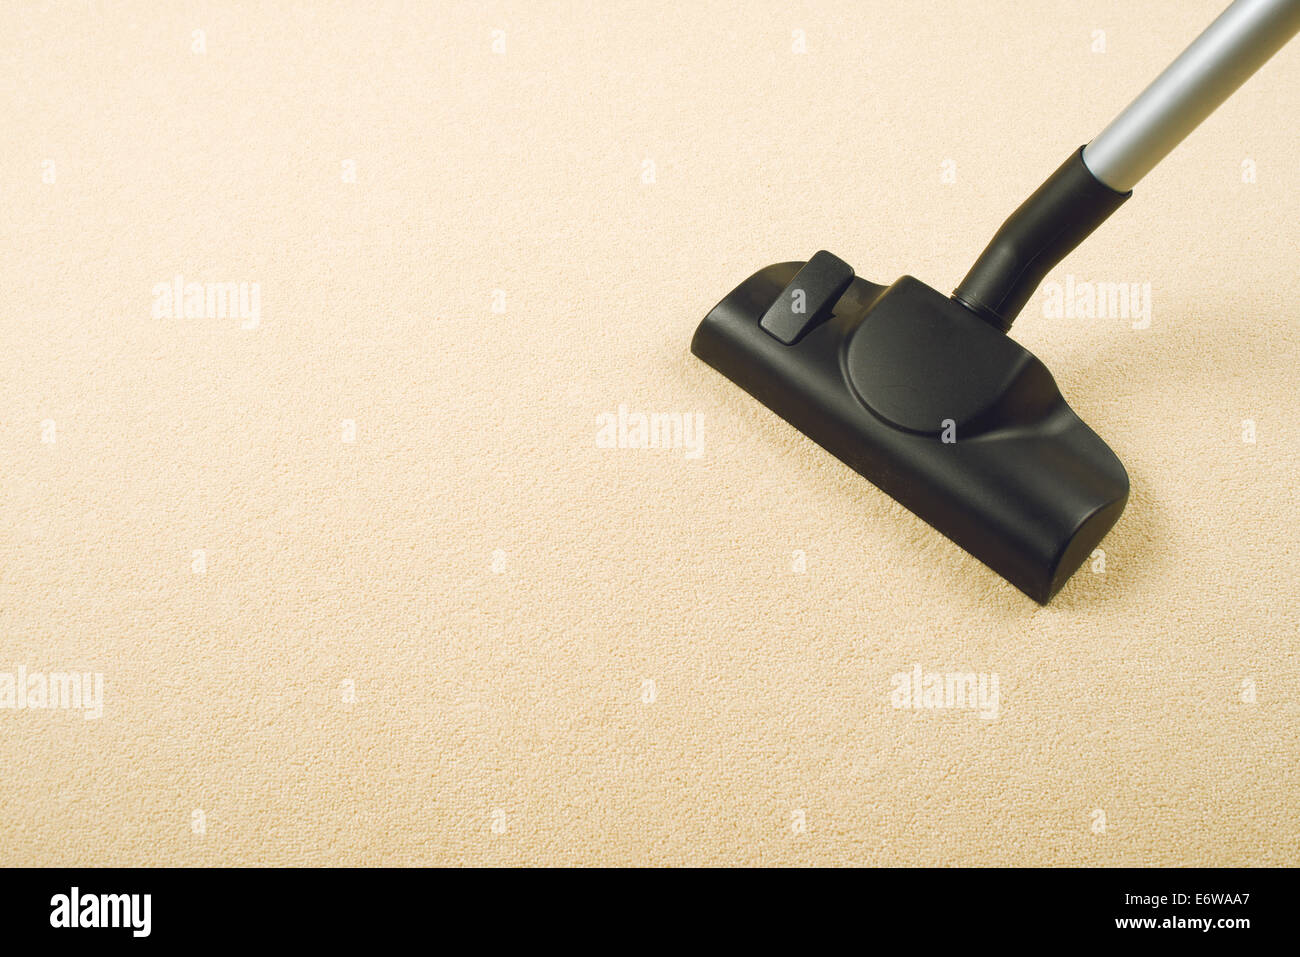 Vacuum Cleaner sweeping Brand New Carpet. Housework and home hygiene. Stock Photo